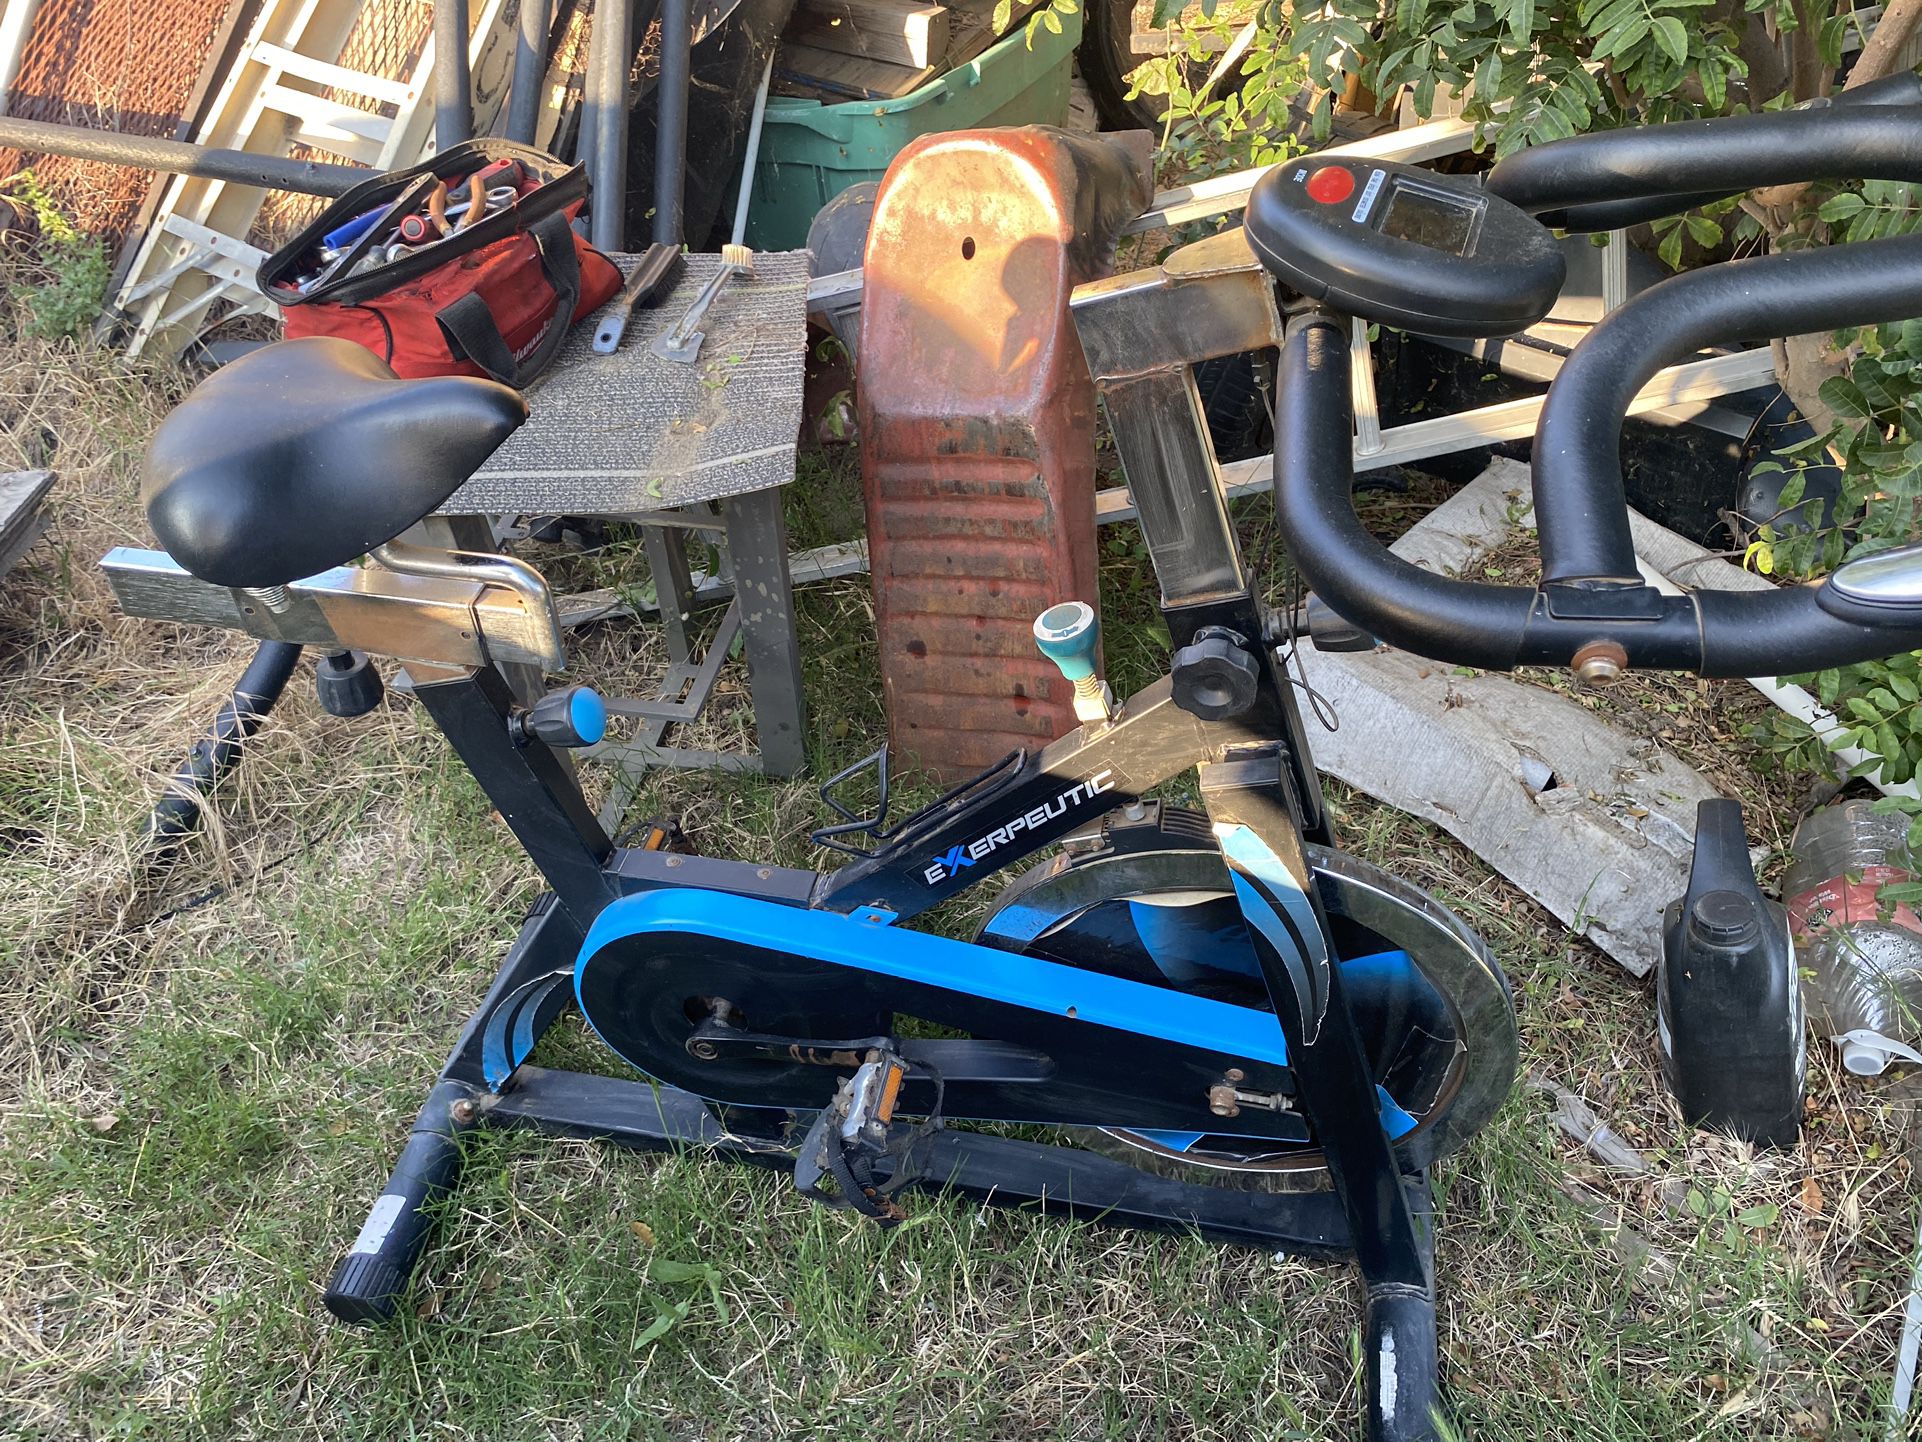 EXERCISE EQUIPMENT.. BOTH WORK FINE WERE IN SHED  FREE!  FREE! 